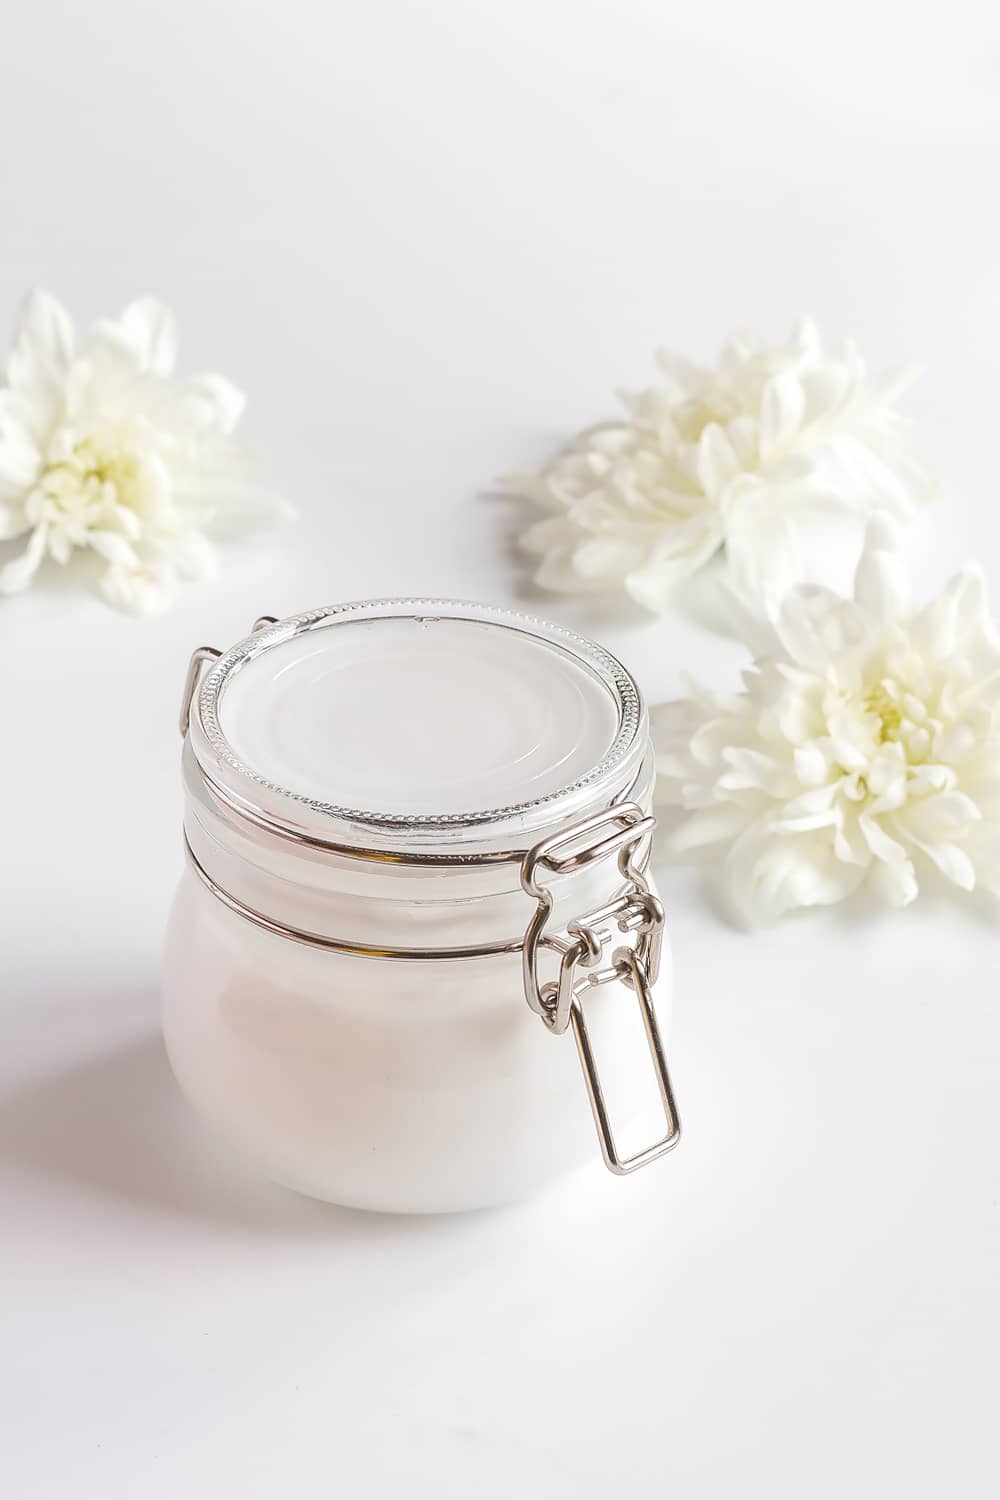 DIY Magnesium Lotion Recipe for Sleep, Relief Anxiety A Life Adjacent